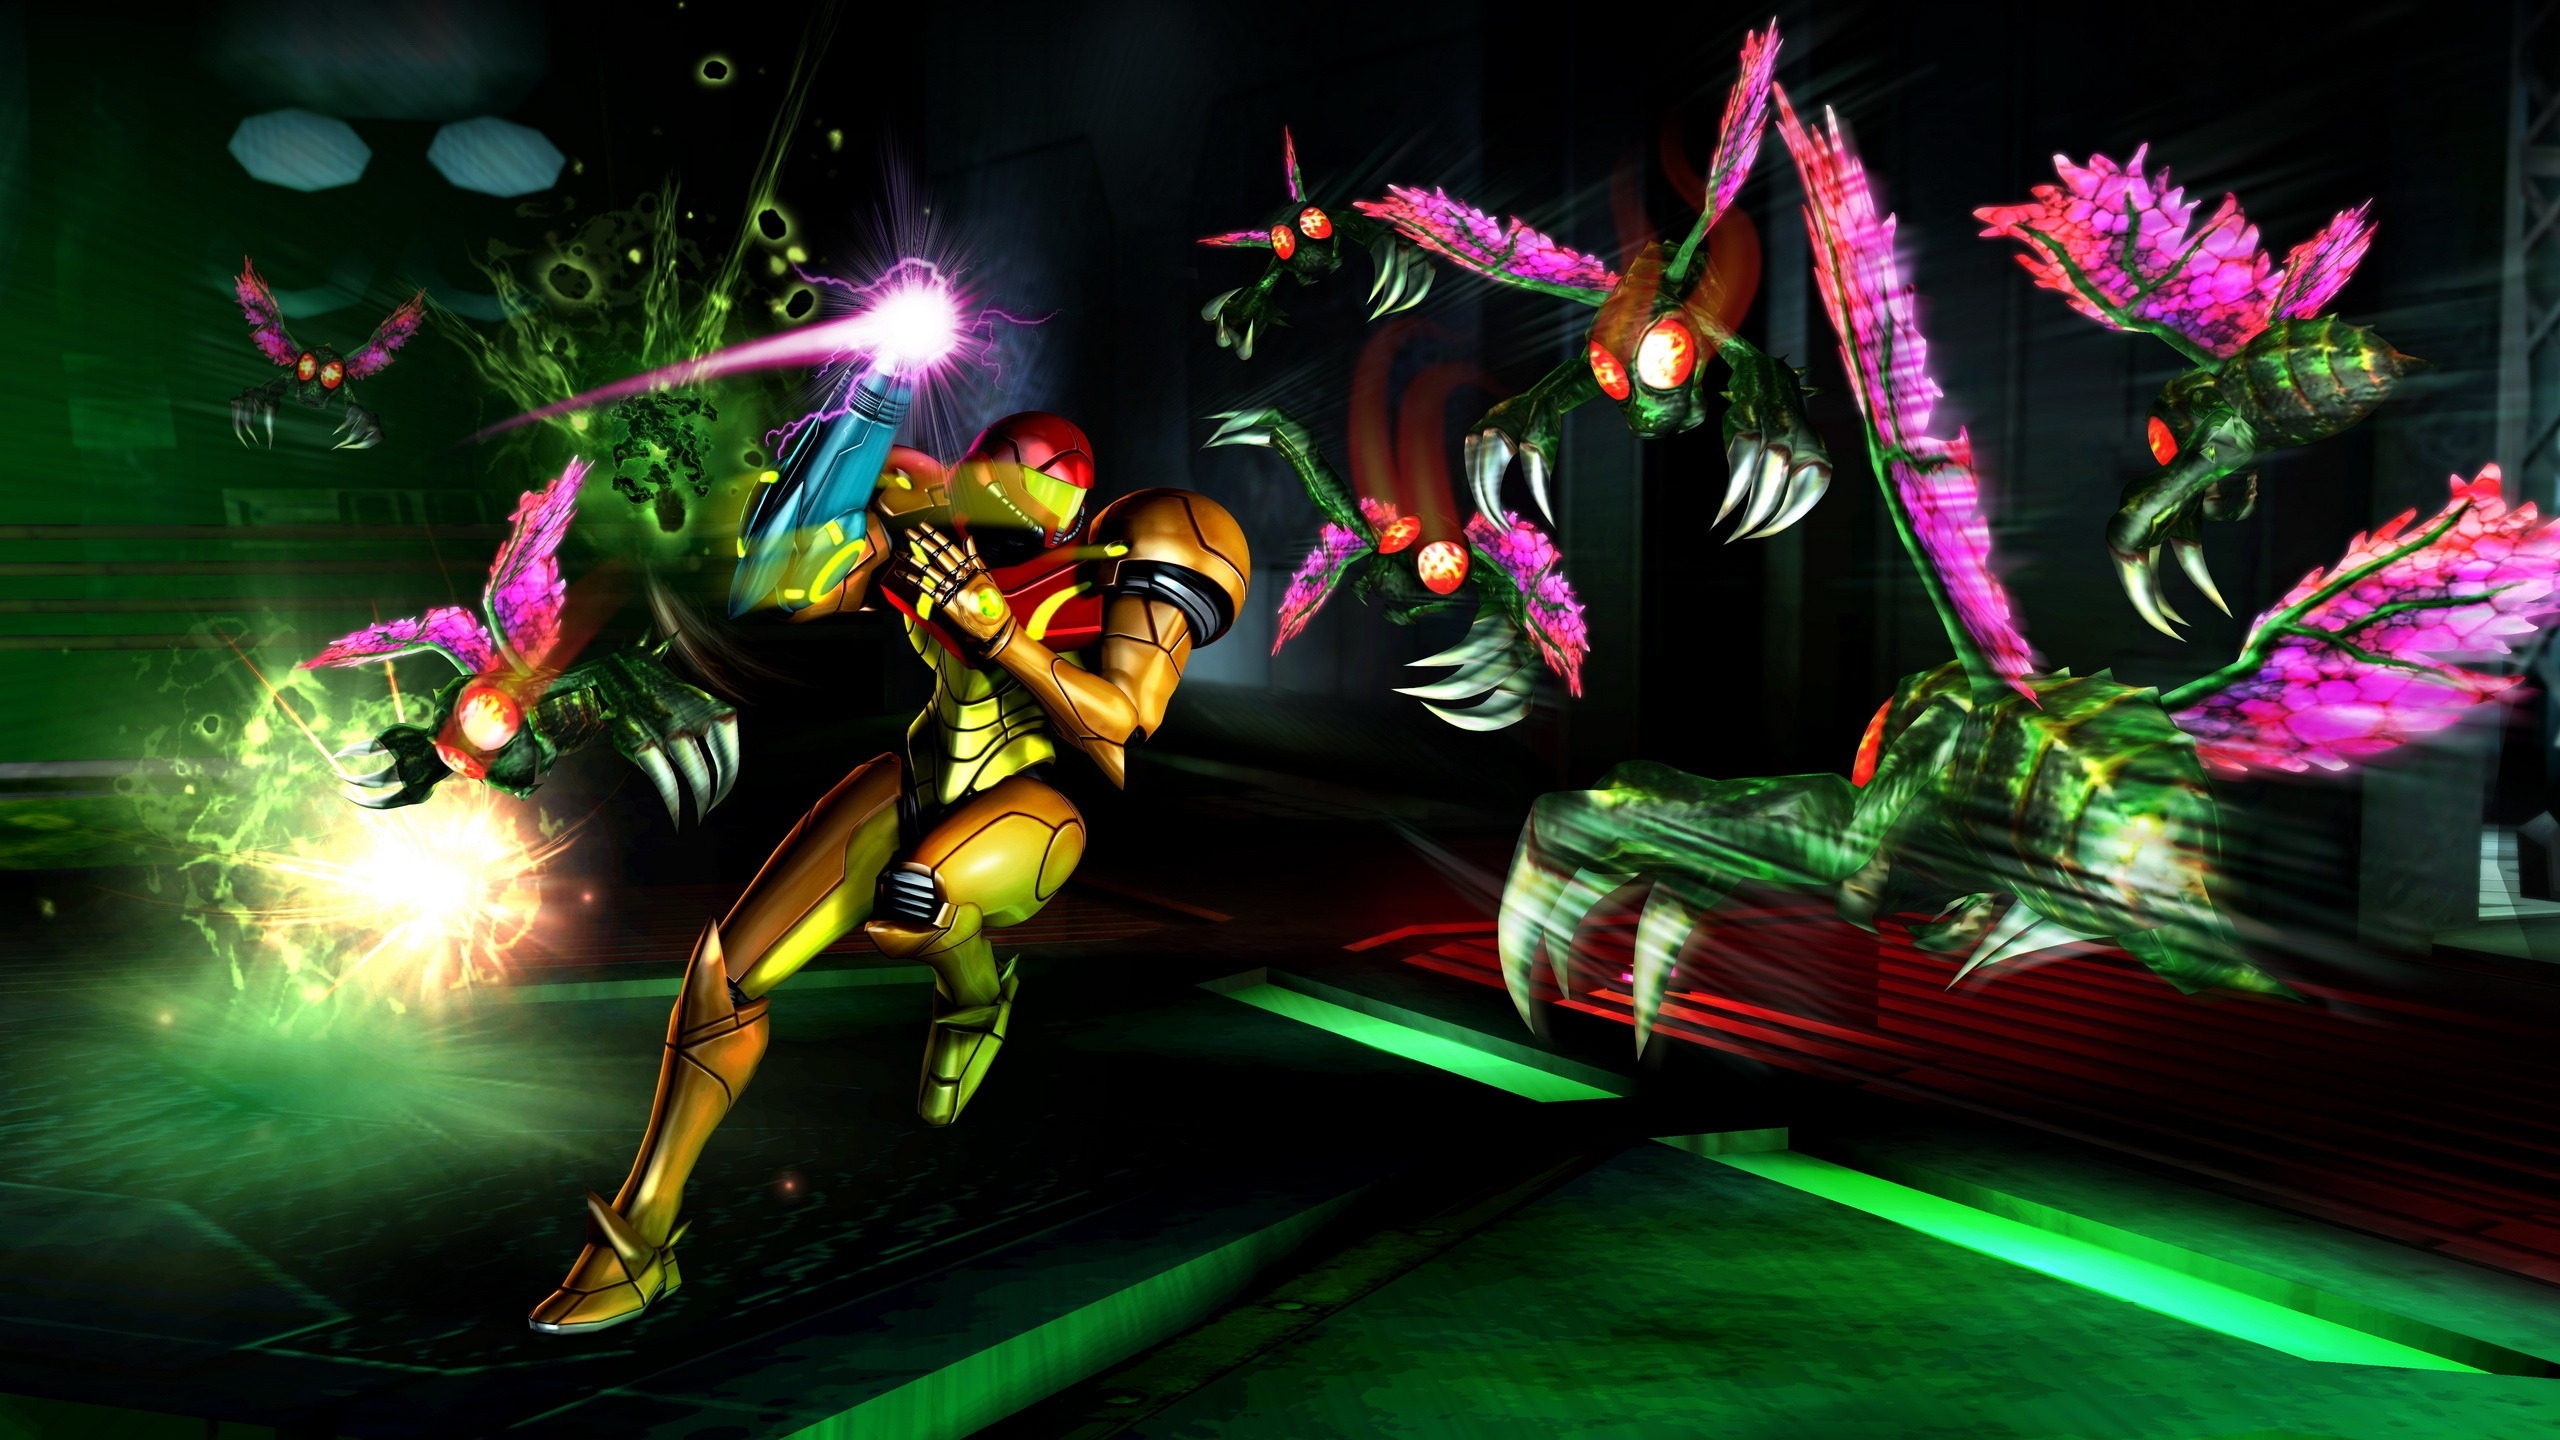 Metroid Other M for 2560x1440 HDTV resolution